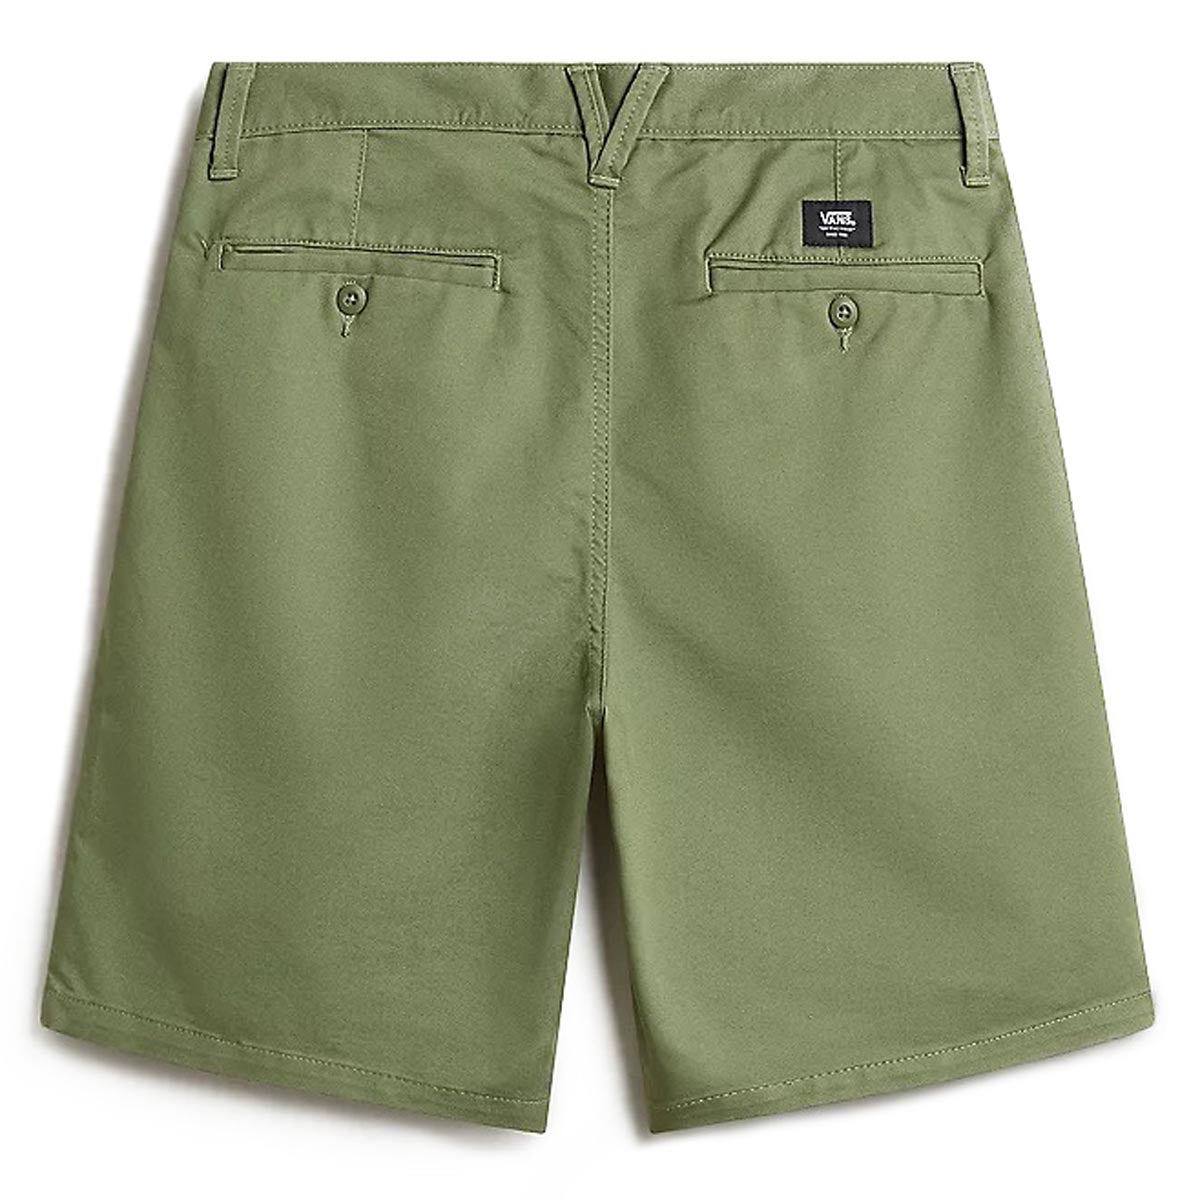 Vans Authentic Chino Relaxed Shorts - Olivine image 2